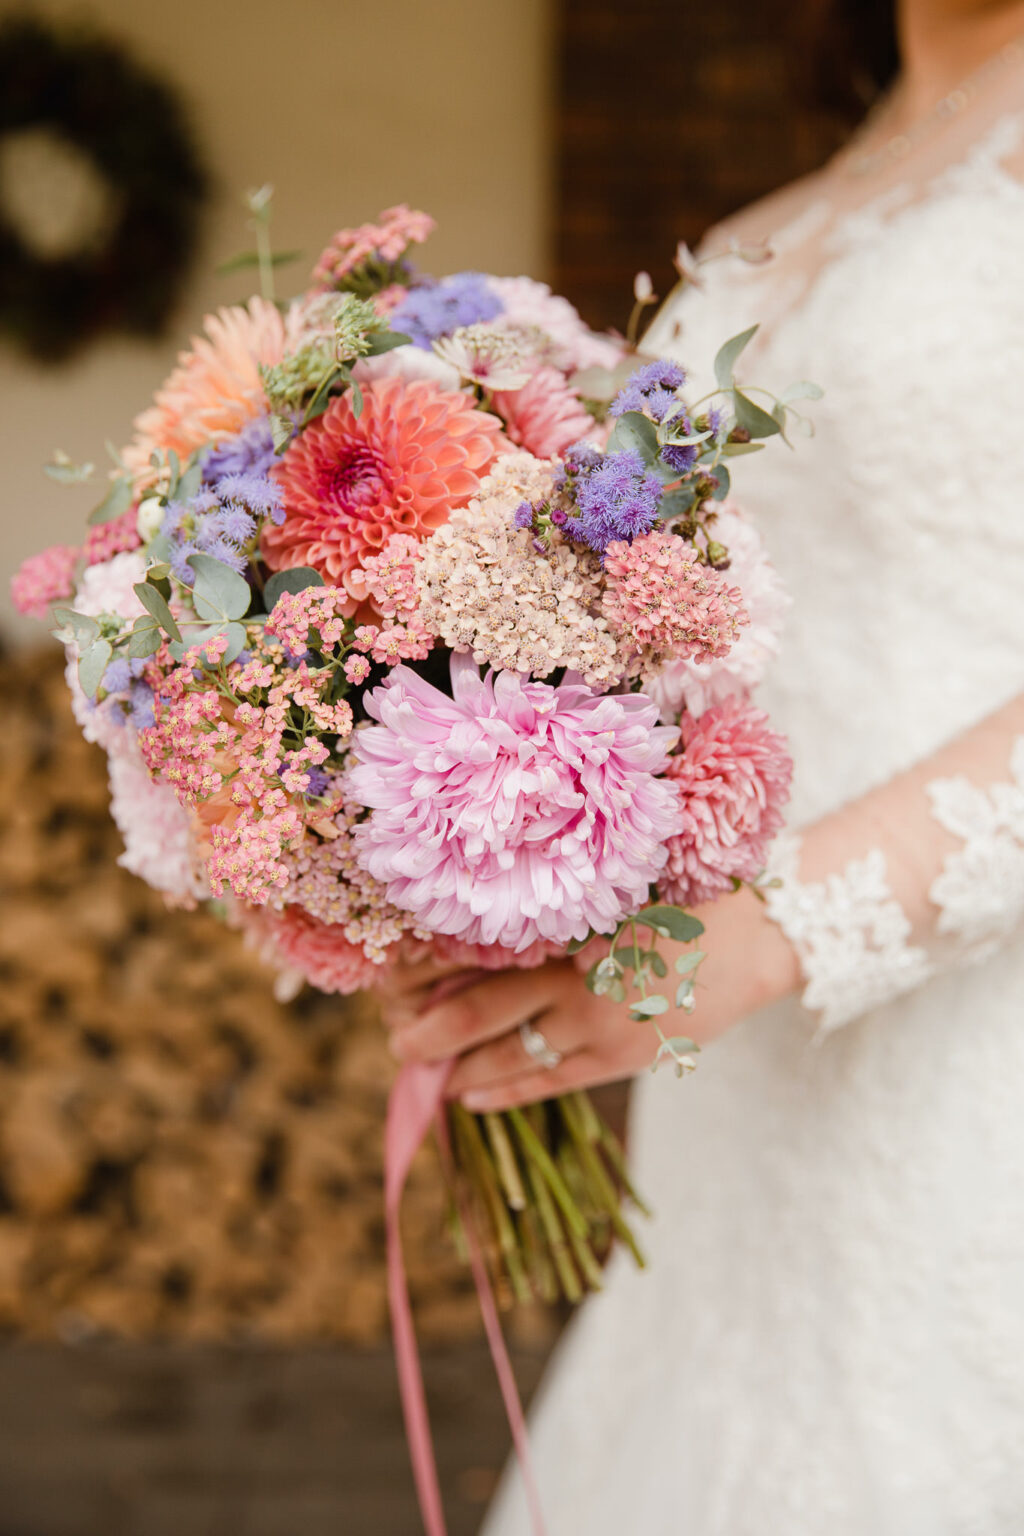 A pastel textured wedding bouquet with dahlias and pale pink chyrsanths by Nature's Posy. Photo credit: Michelle Hugglestone